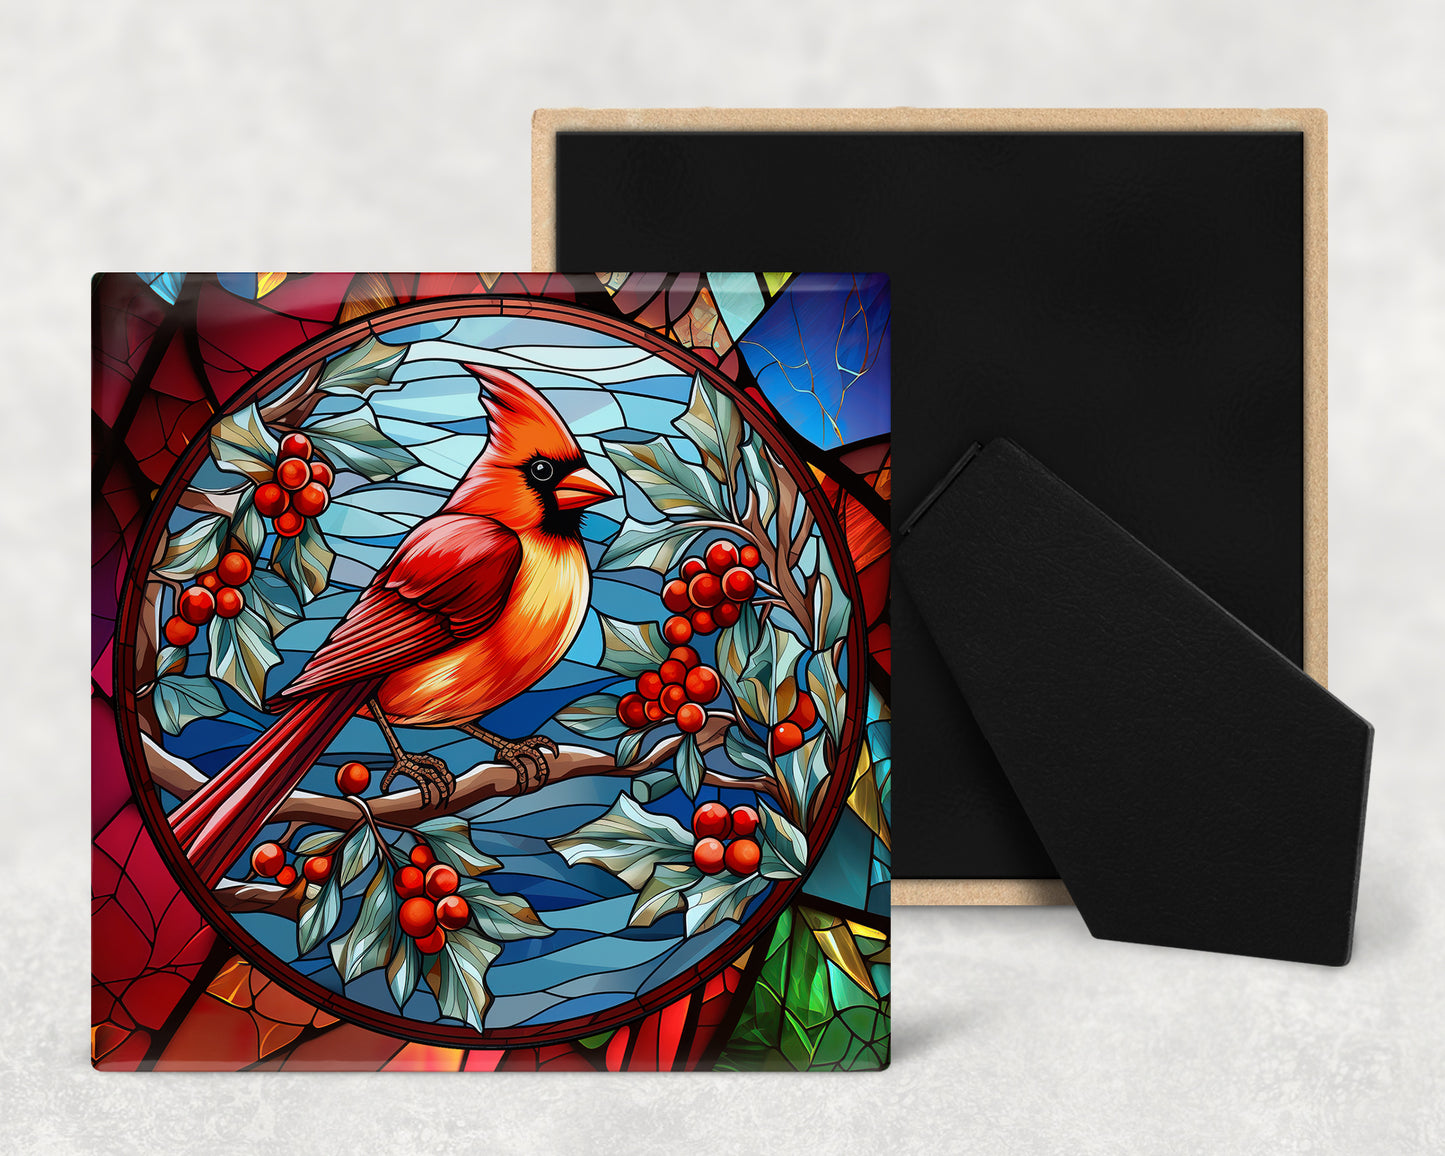 Stained Glass Cardinal Art Decorative Ceramic Tile with Optional Easel Back - Available in 3 Sizes